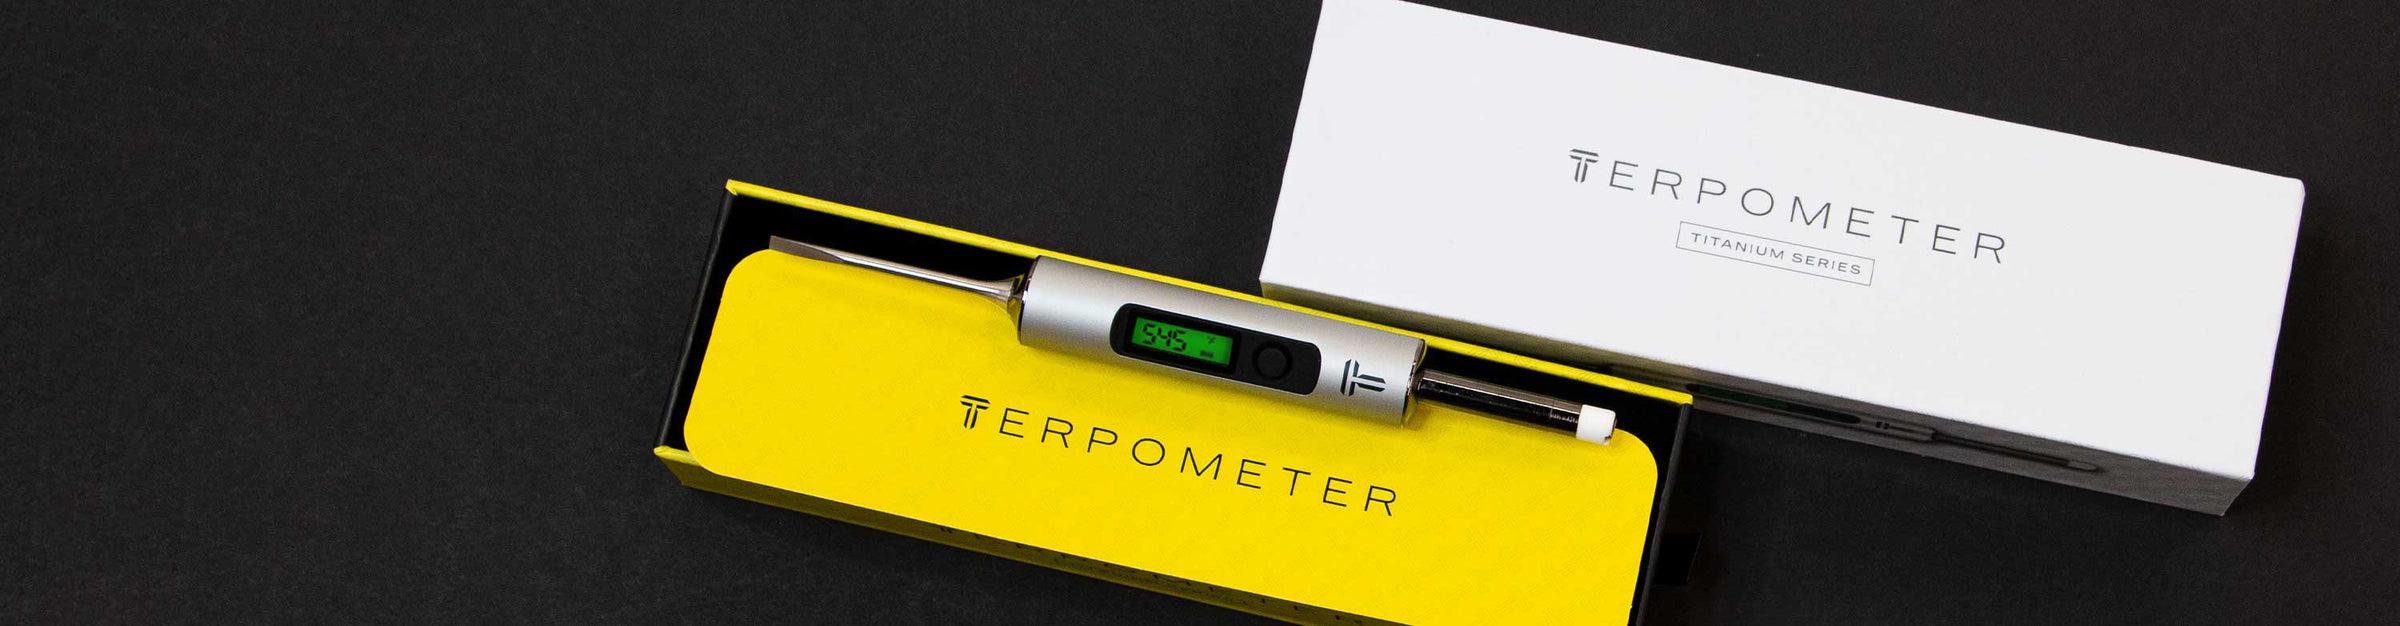 Terpometer Digital Thermometer laying down with packaging on black background